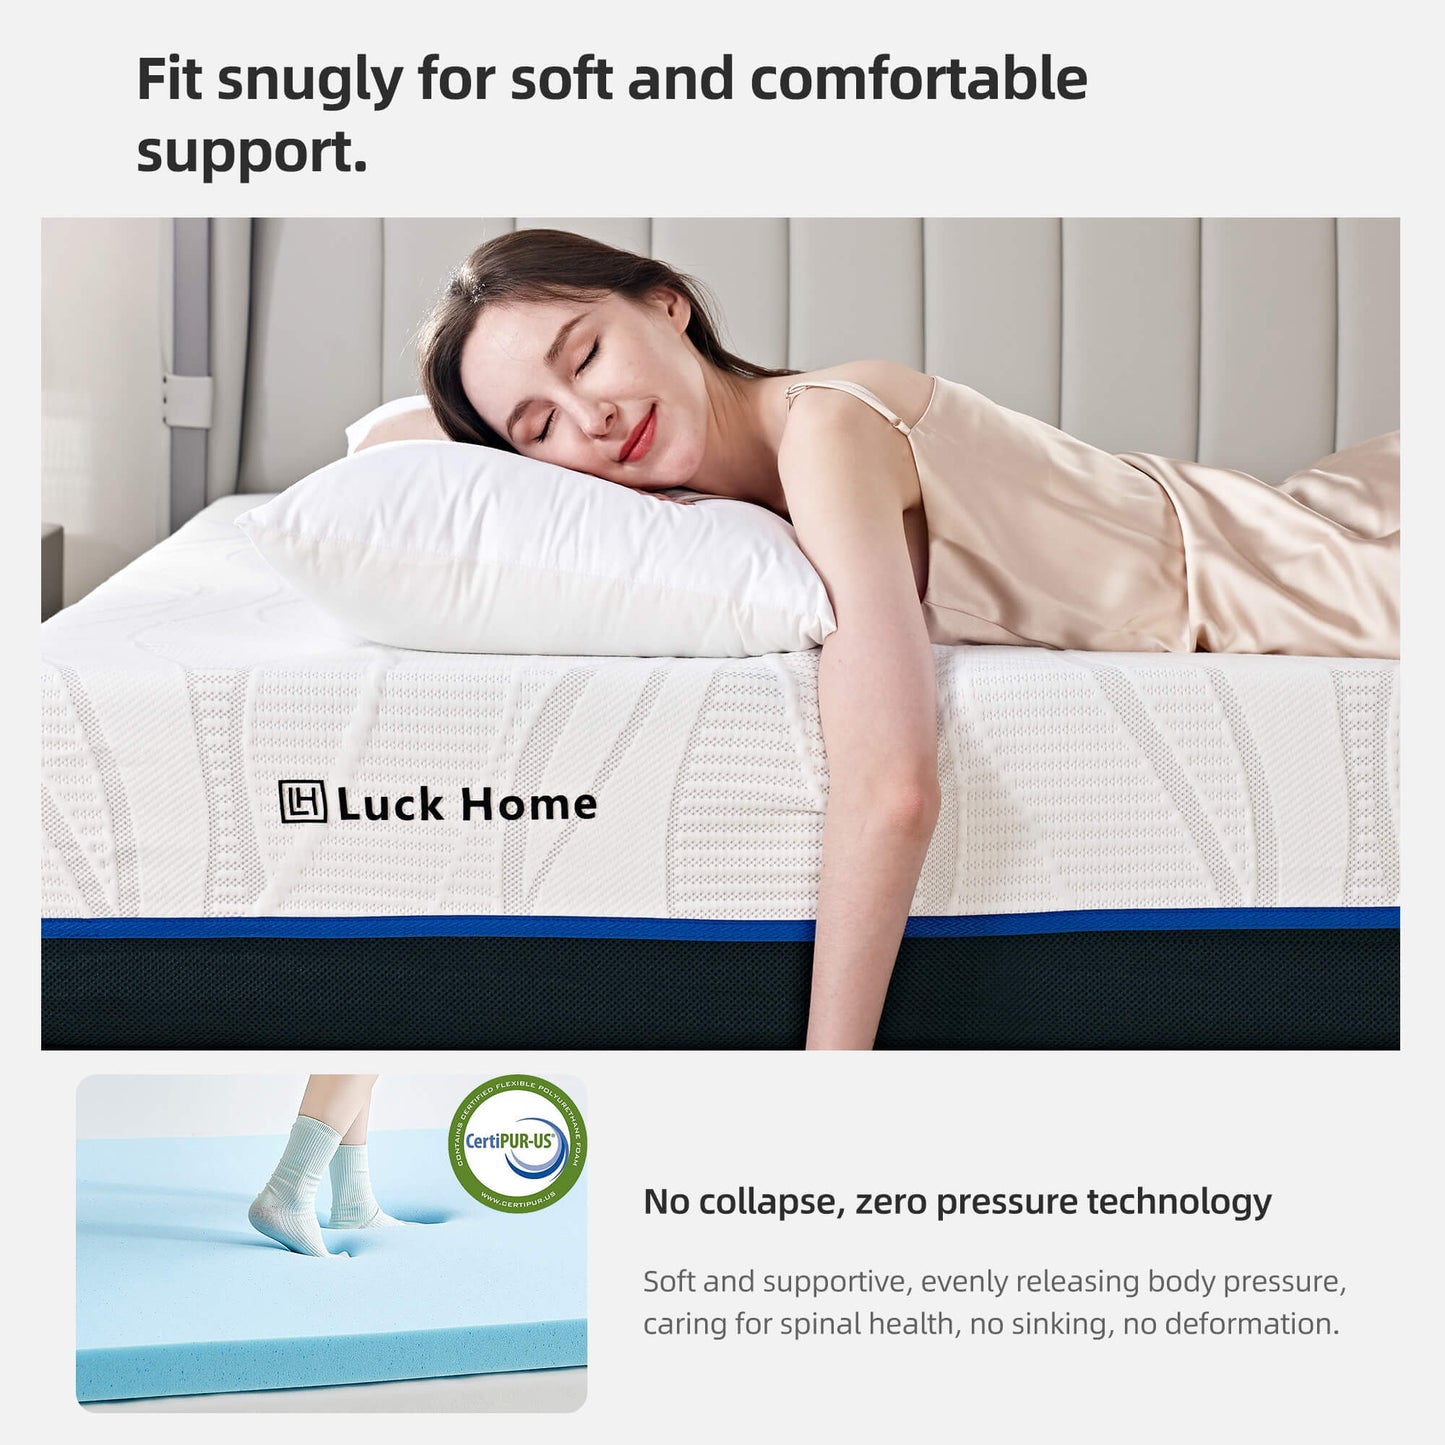 Cloud Support Zero-Pressure Scientific Spine Protection Mattress - The Ultimate Sleep Experience